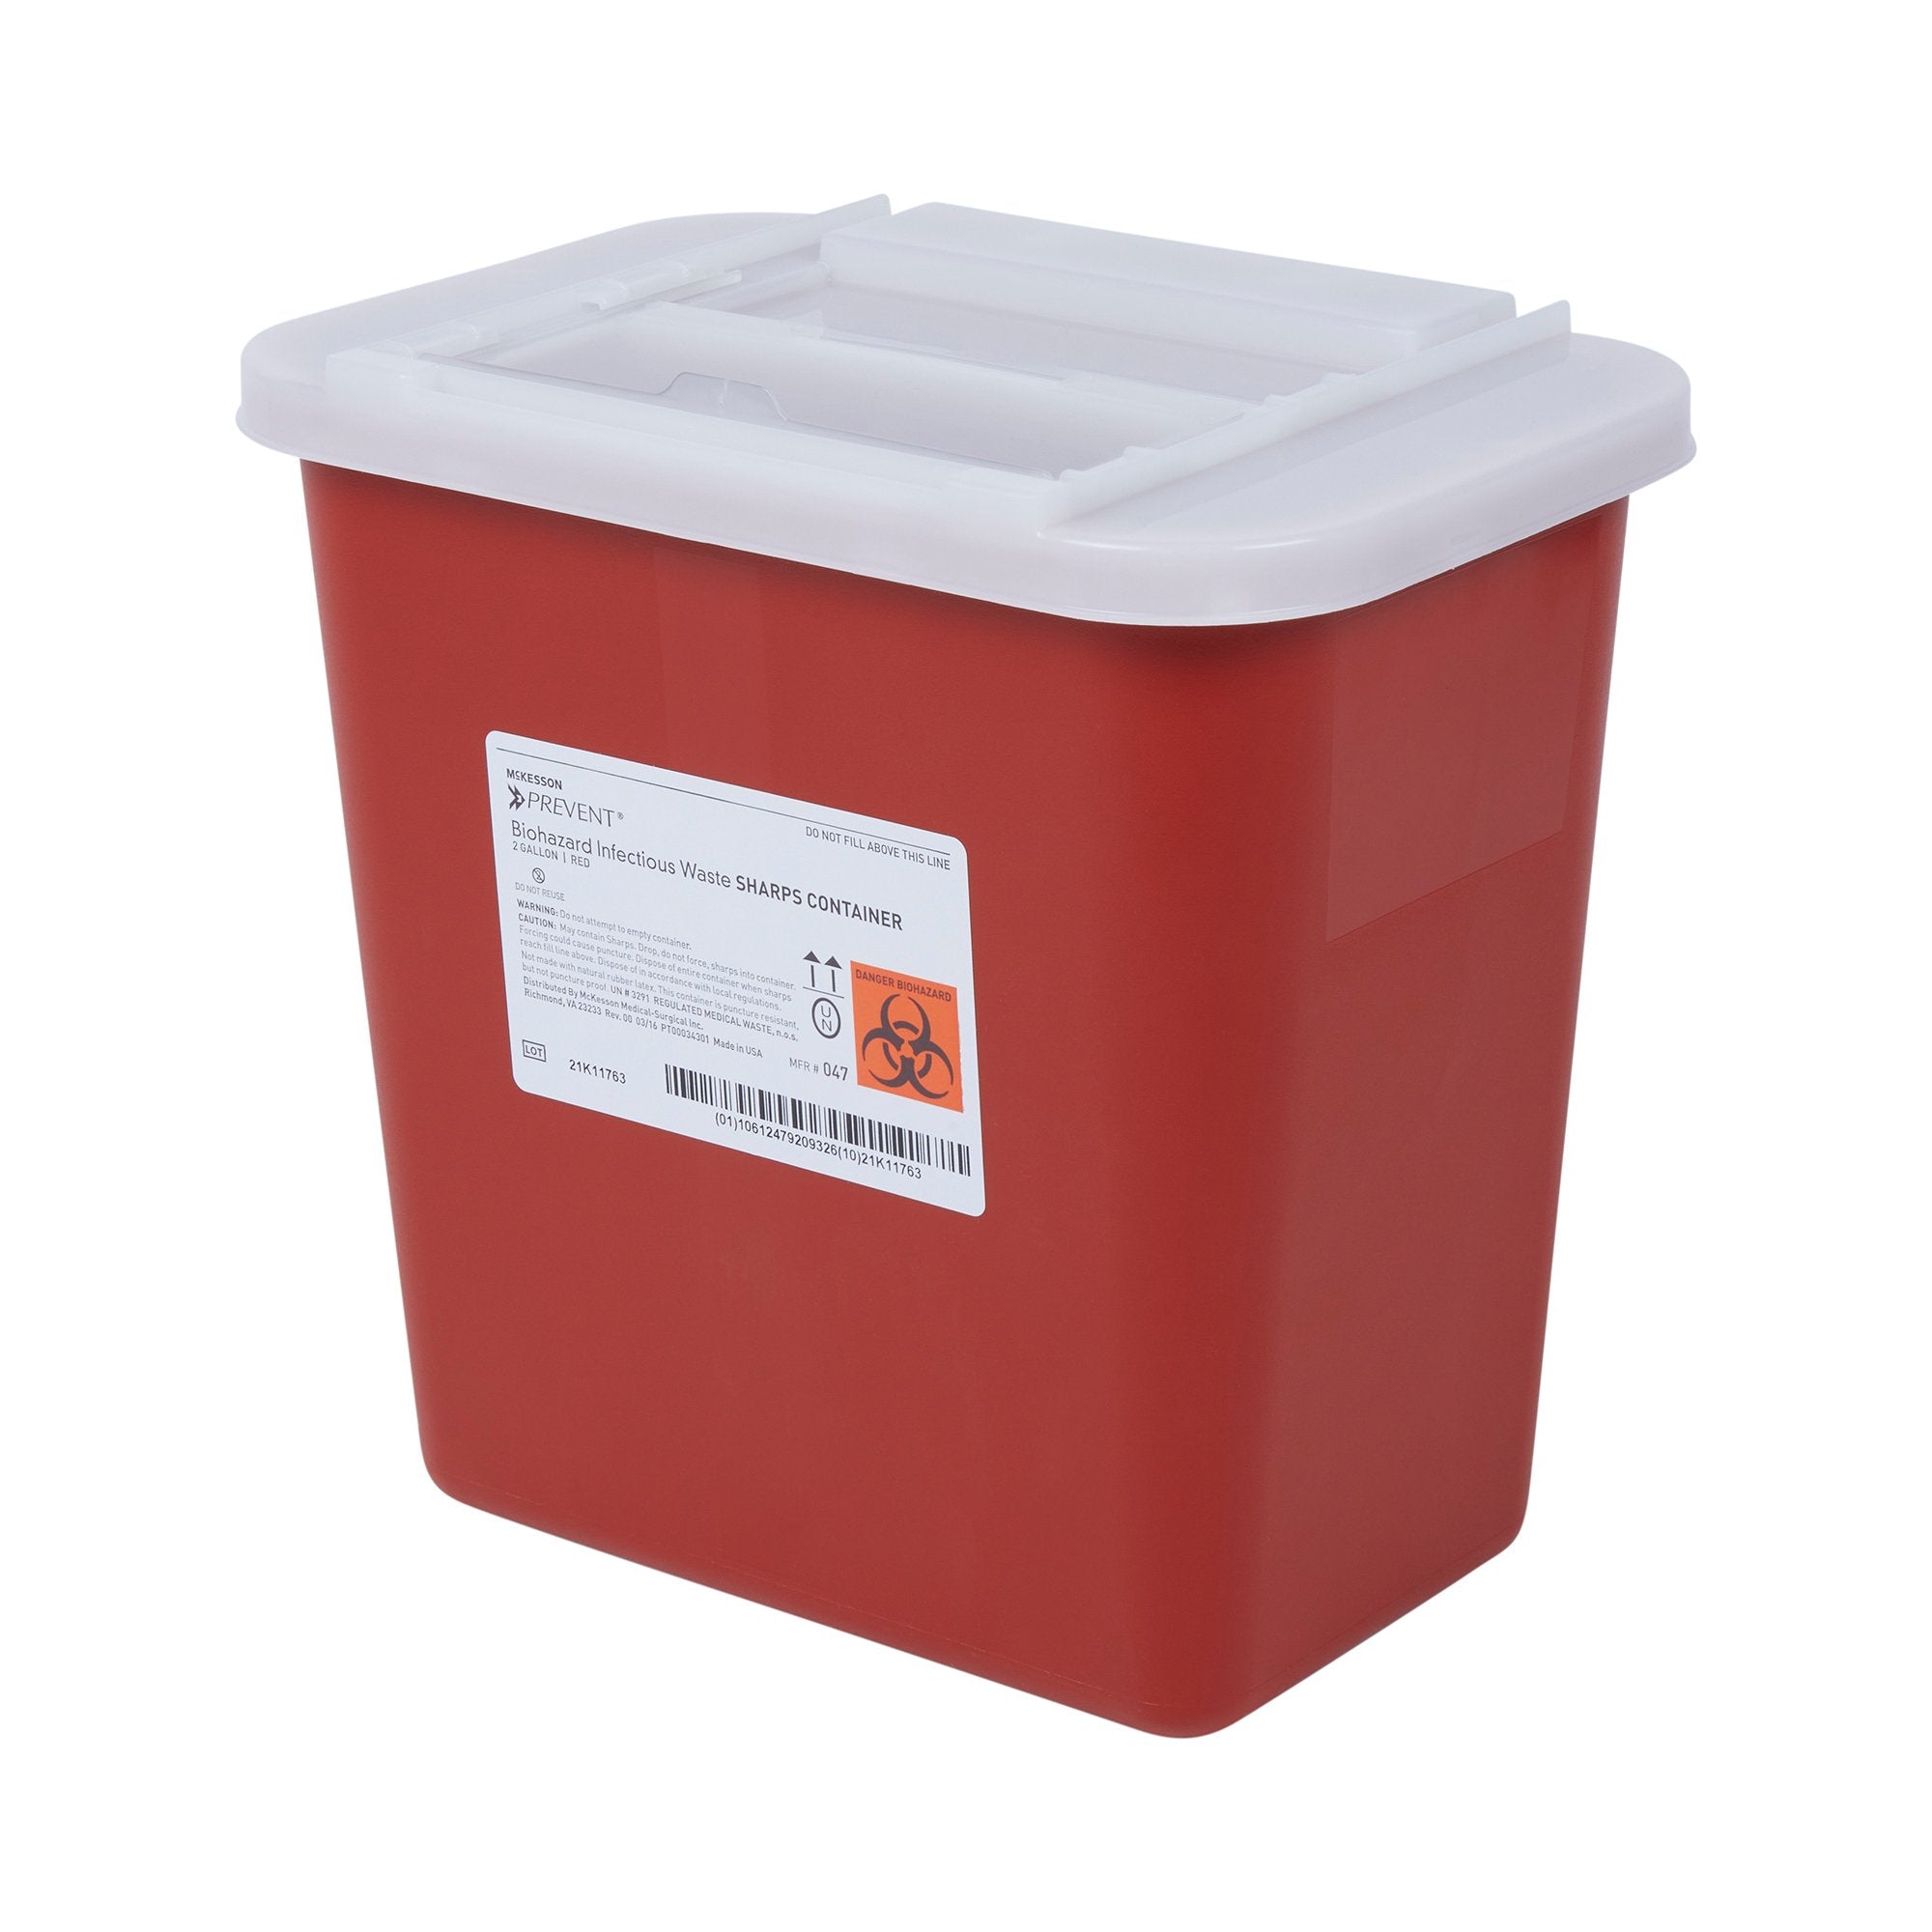 Sharps Container McKesson Prevent® Red Base 10-1/4 H X 7 W X 10-1/2 D Inch Horizontal Entry 2 Gallon